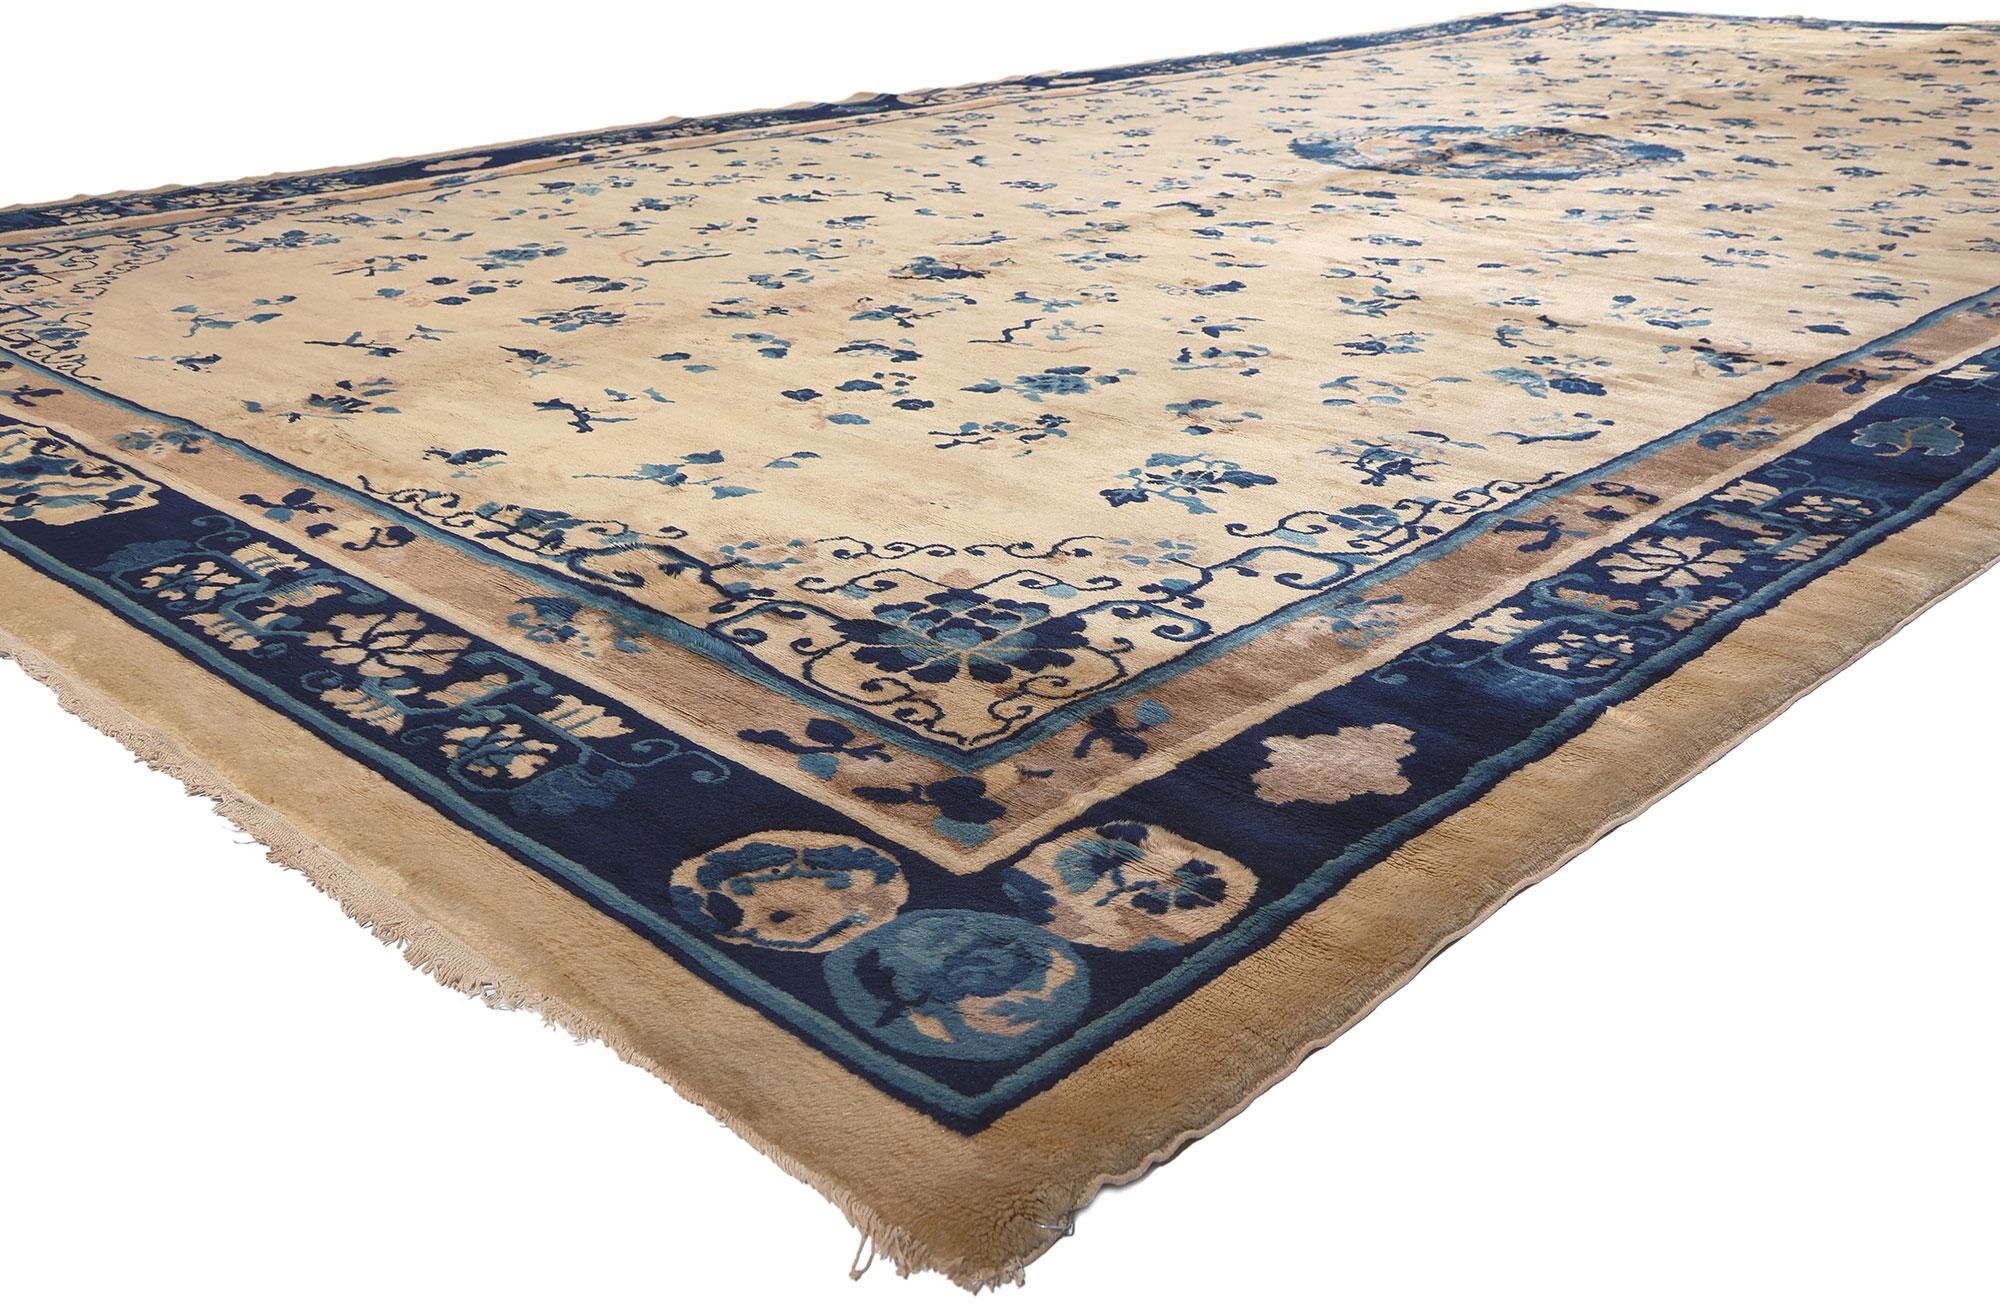 72179 Late 19th Century Antique Chinese Peking Rug, 10'02 x 19'03. Chinoiserie Chic converges with regal decadence in this hand-knotted wool oversized antique Chinese Peking rug, embodying a captivating blend of intricate floral details and